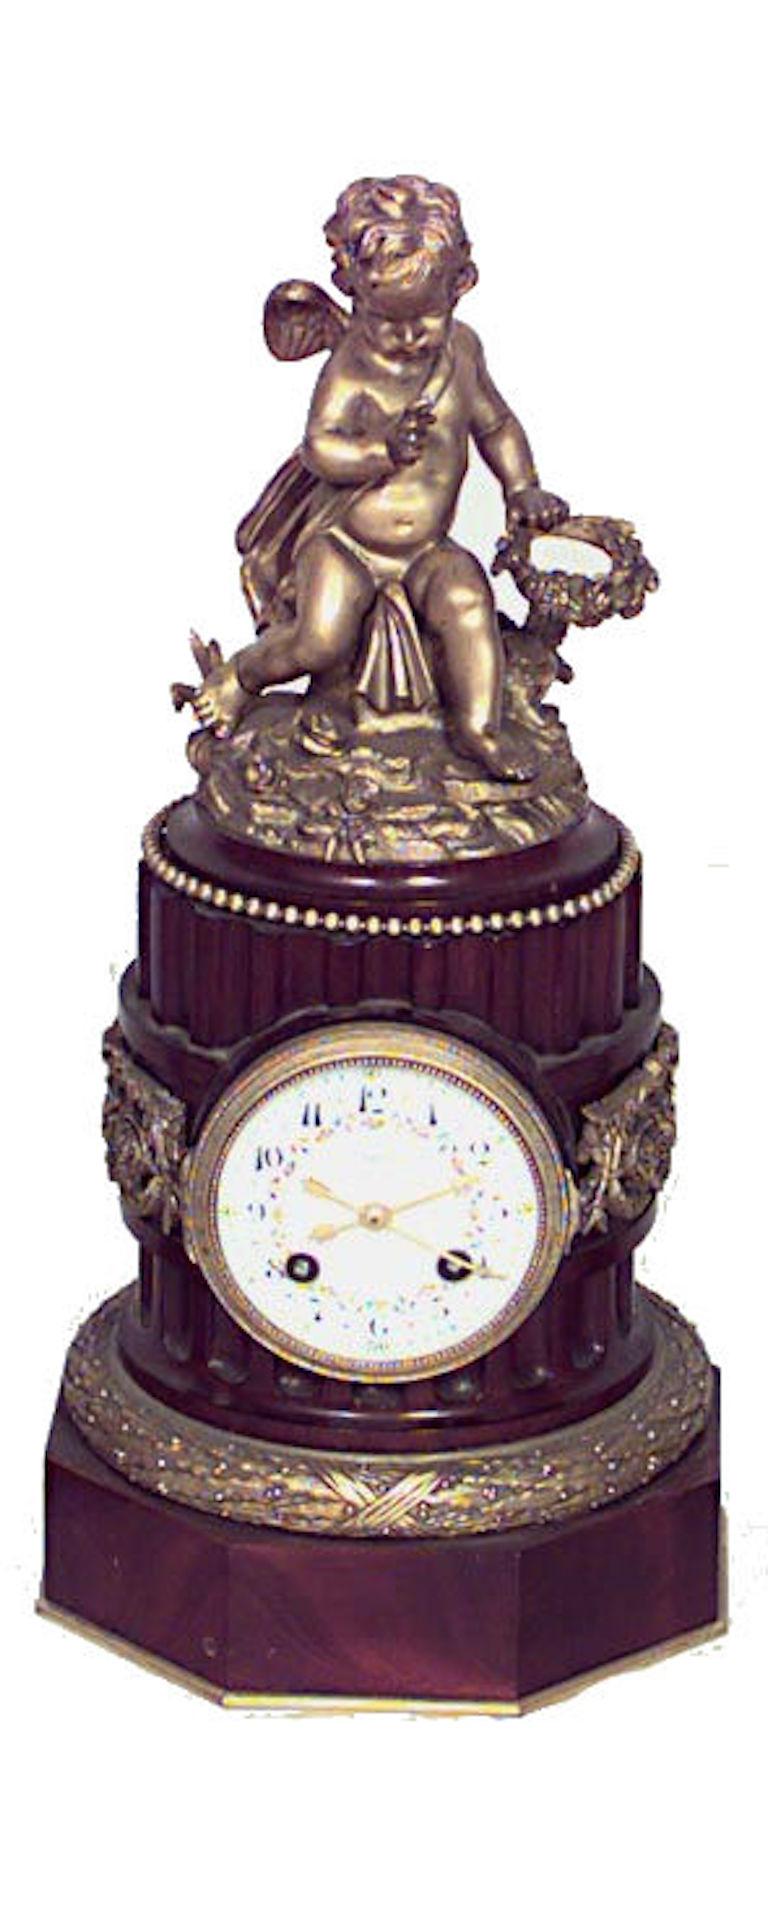 3-Piece French Louis XVI-style (19th Century) mahogany clock set with Pair of candelabra with fluted design and bronze dore cupids and trim, Candelabra 14